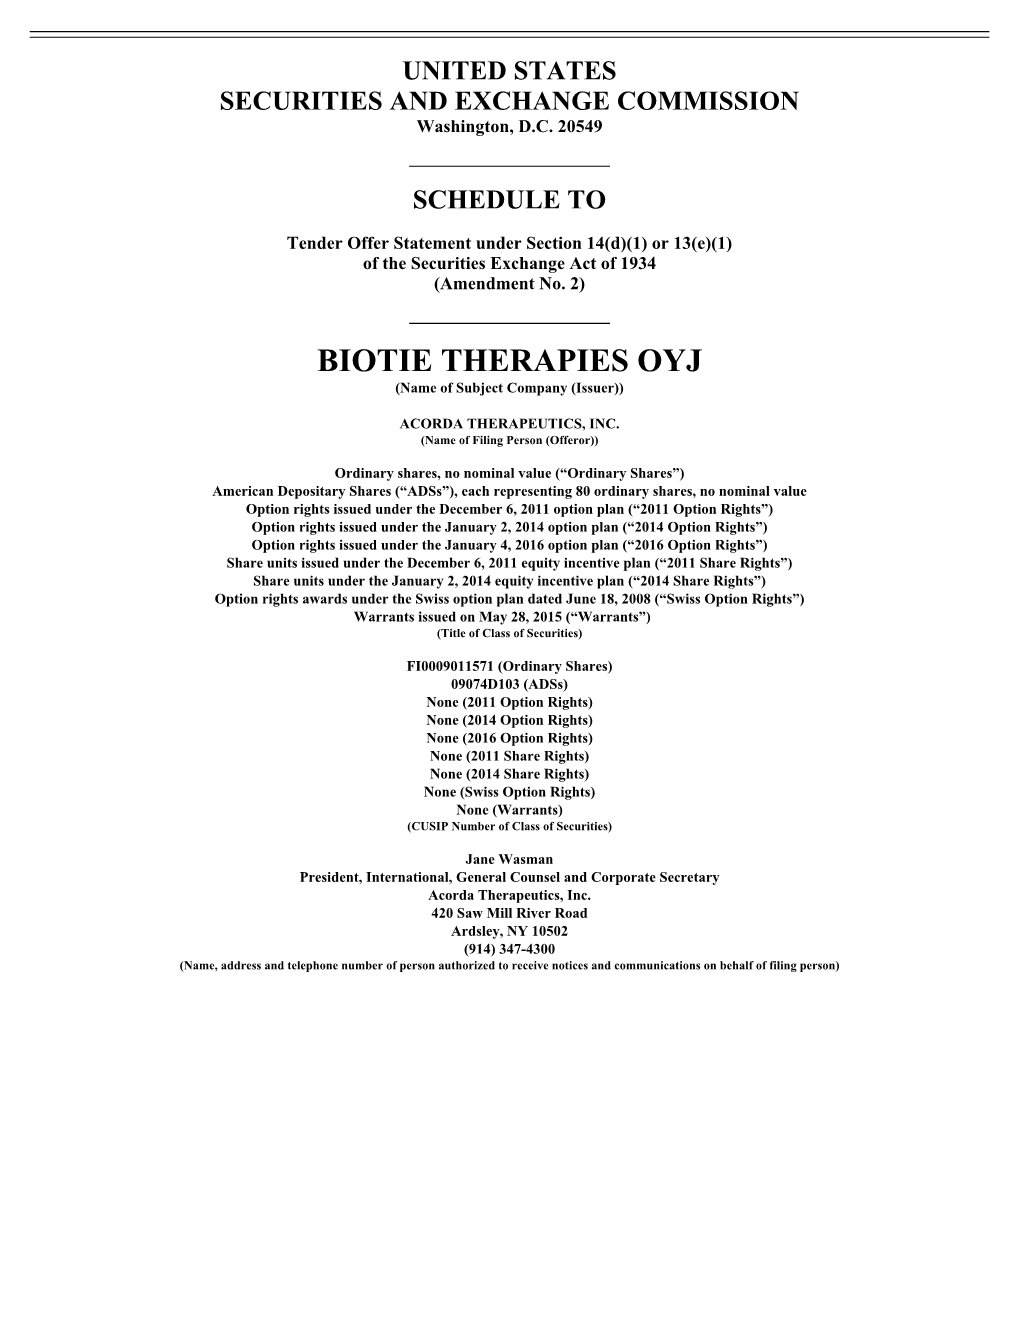 BIOTIE THERAPIES OYJ (Name of Subject Company (Issuer))